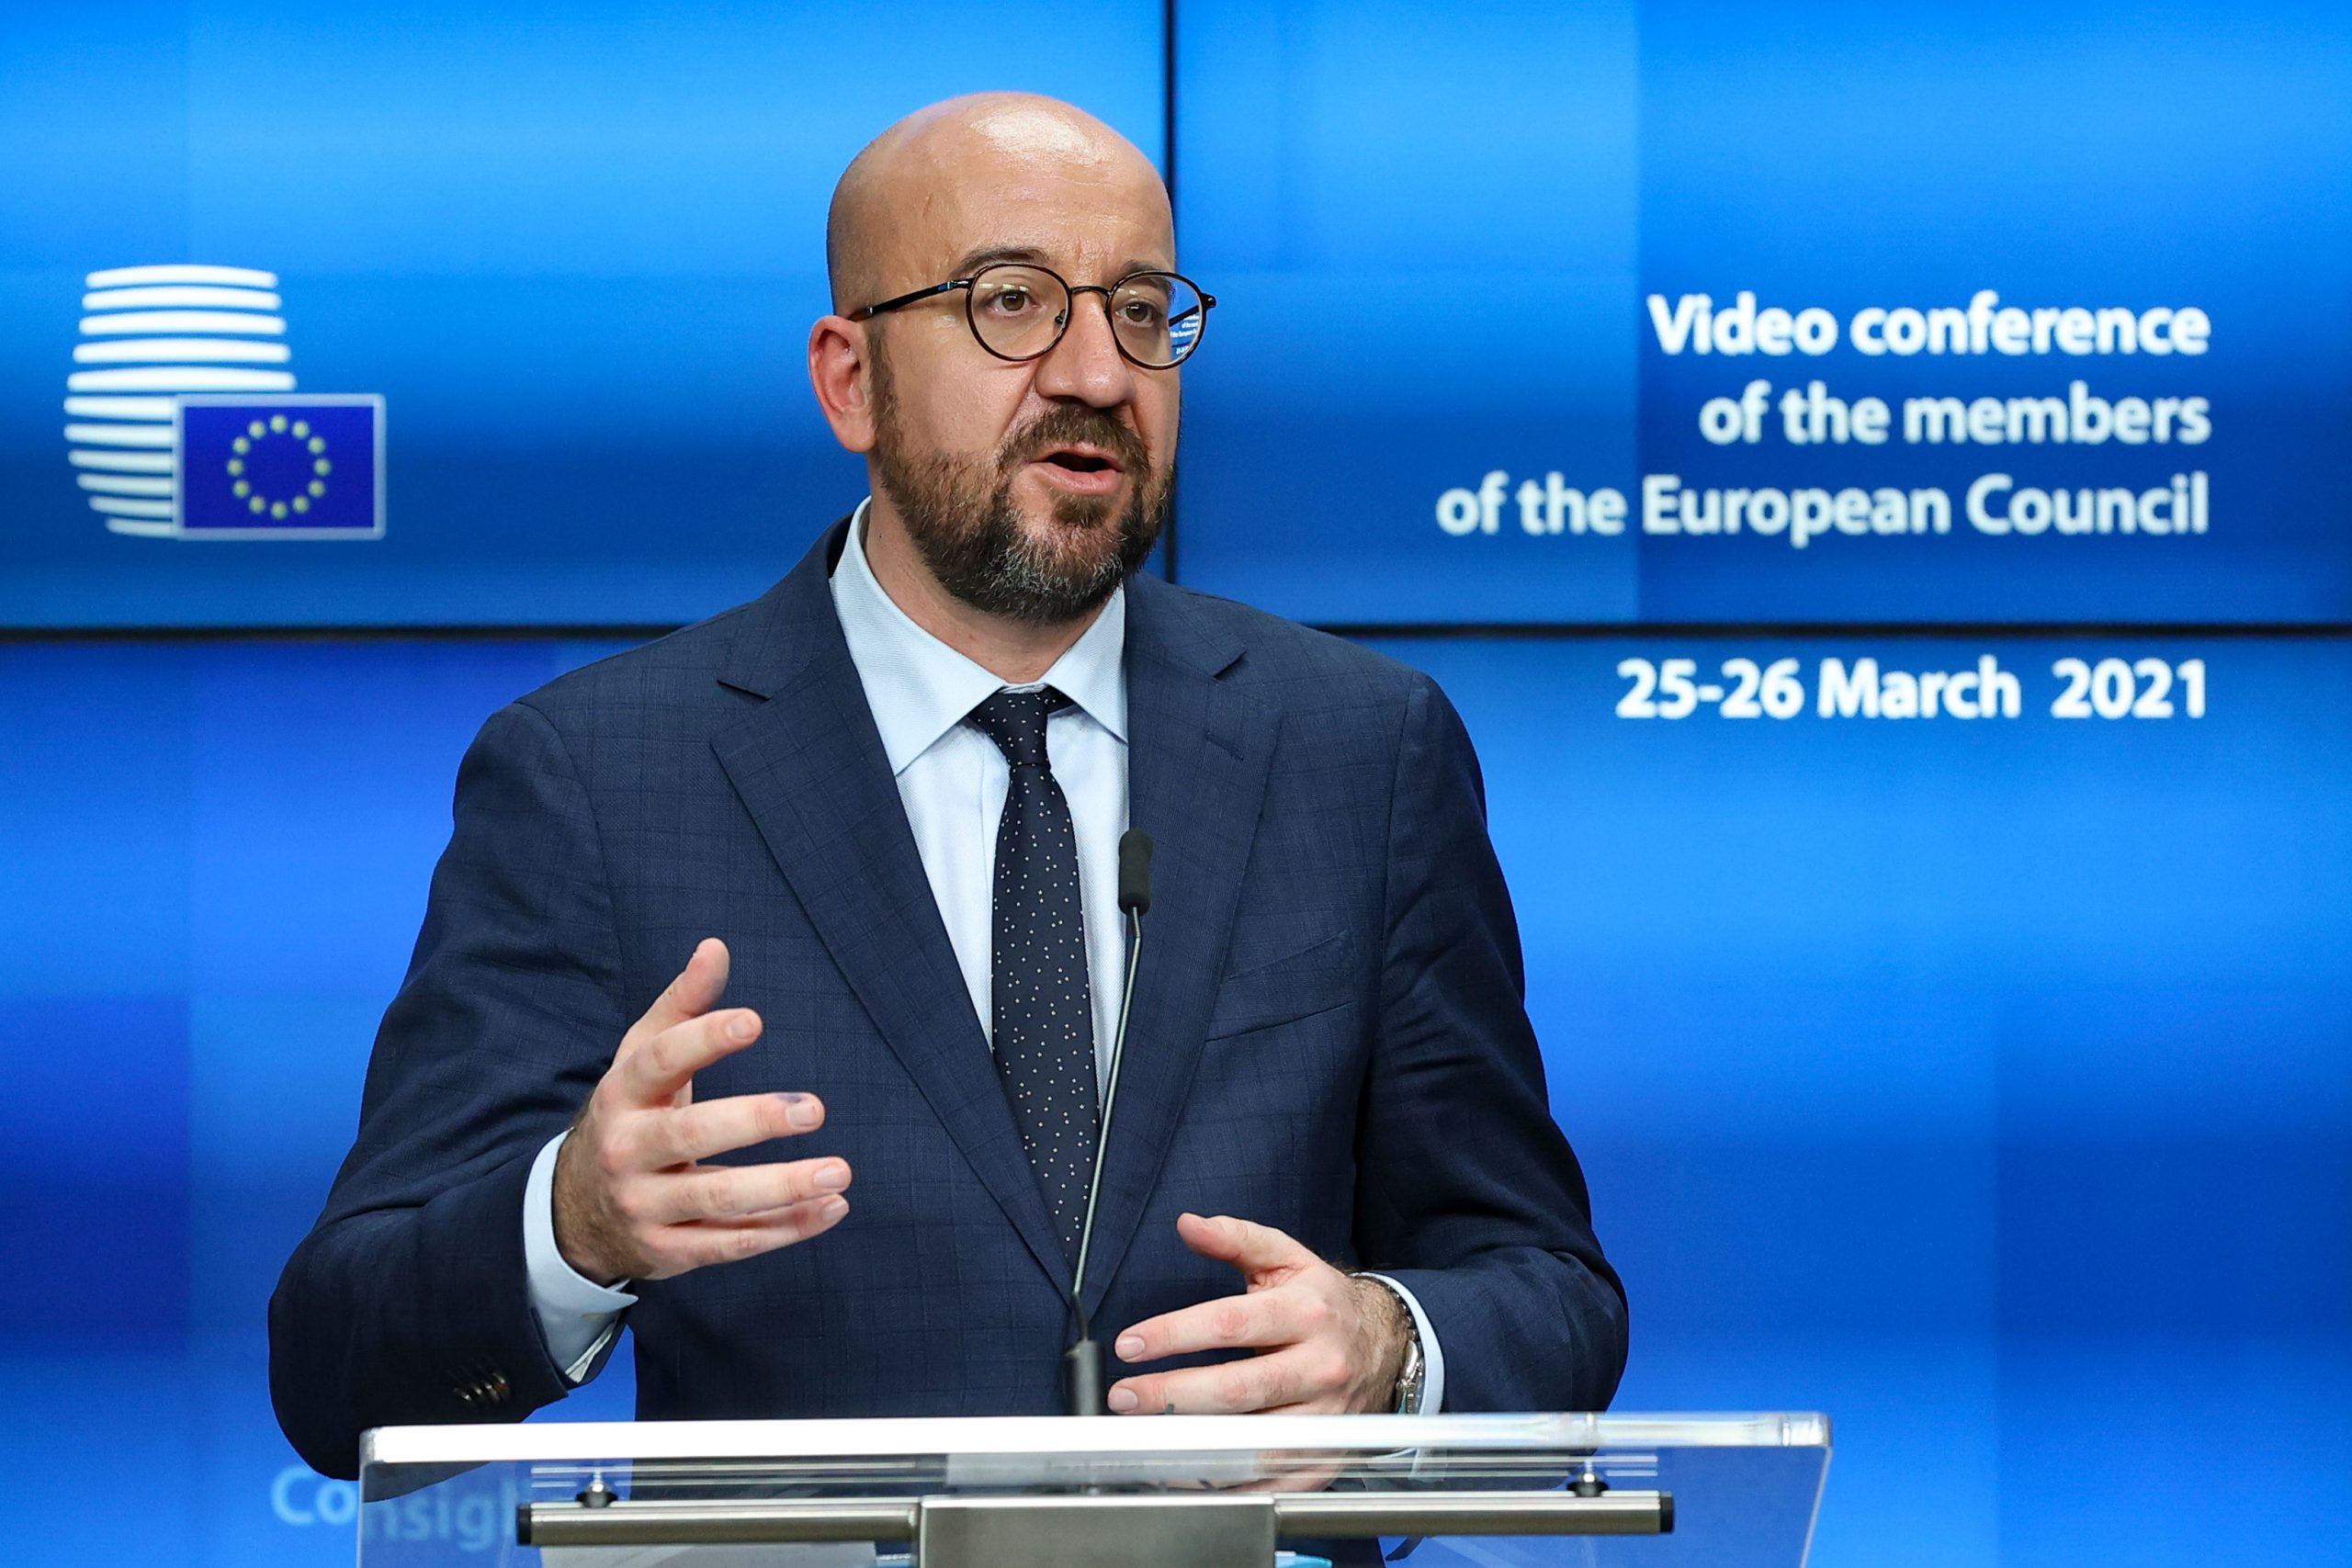 epa09097938 European Council President Charles Michel speaks during a joint press conference with the European Commission President Ursula von der Leyen (not pictured) at the end of the first day of a European Union (EU) summit over video conference at The European Council Building in Brussels, Belgium, 25 March 2021. A looming third wave of coronavirus and Europe's struggles to mount a vaccination drive is to dominate the EU video summit, despite a welcome guest appearance by the US President.  EPA/ARIS OIKONOMOU / POOL